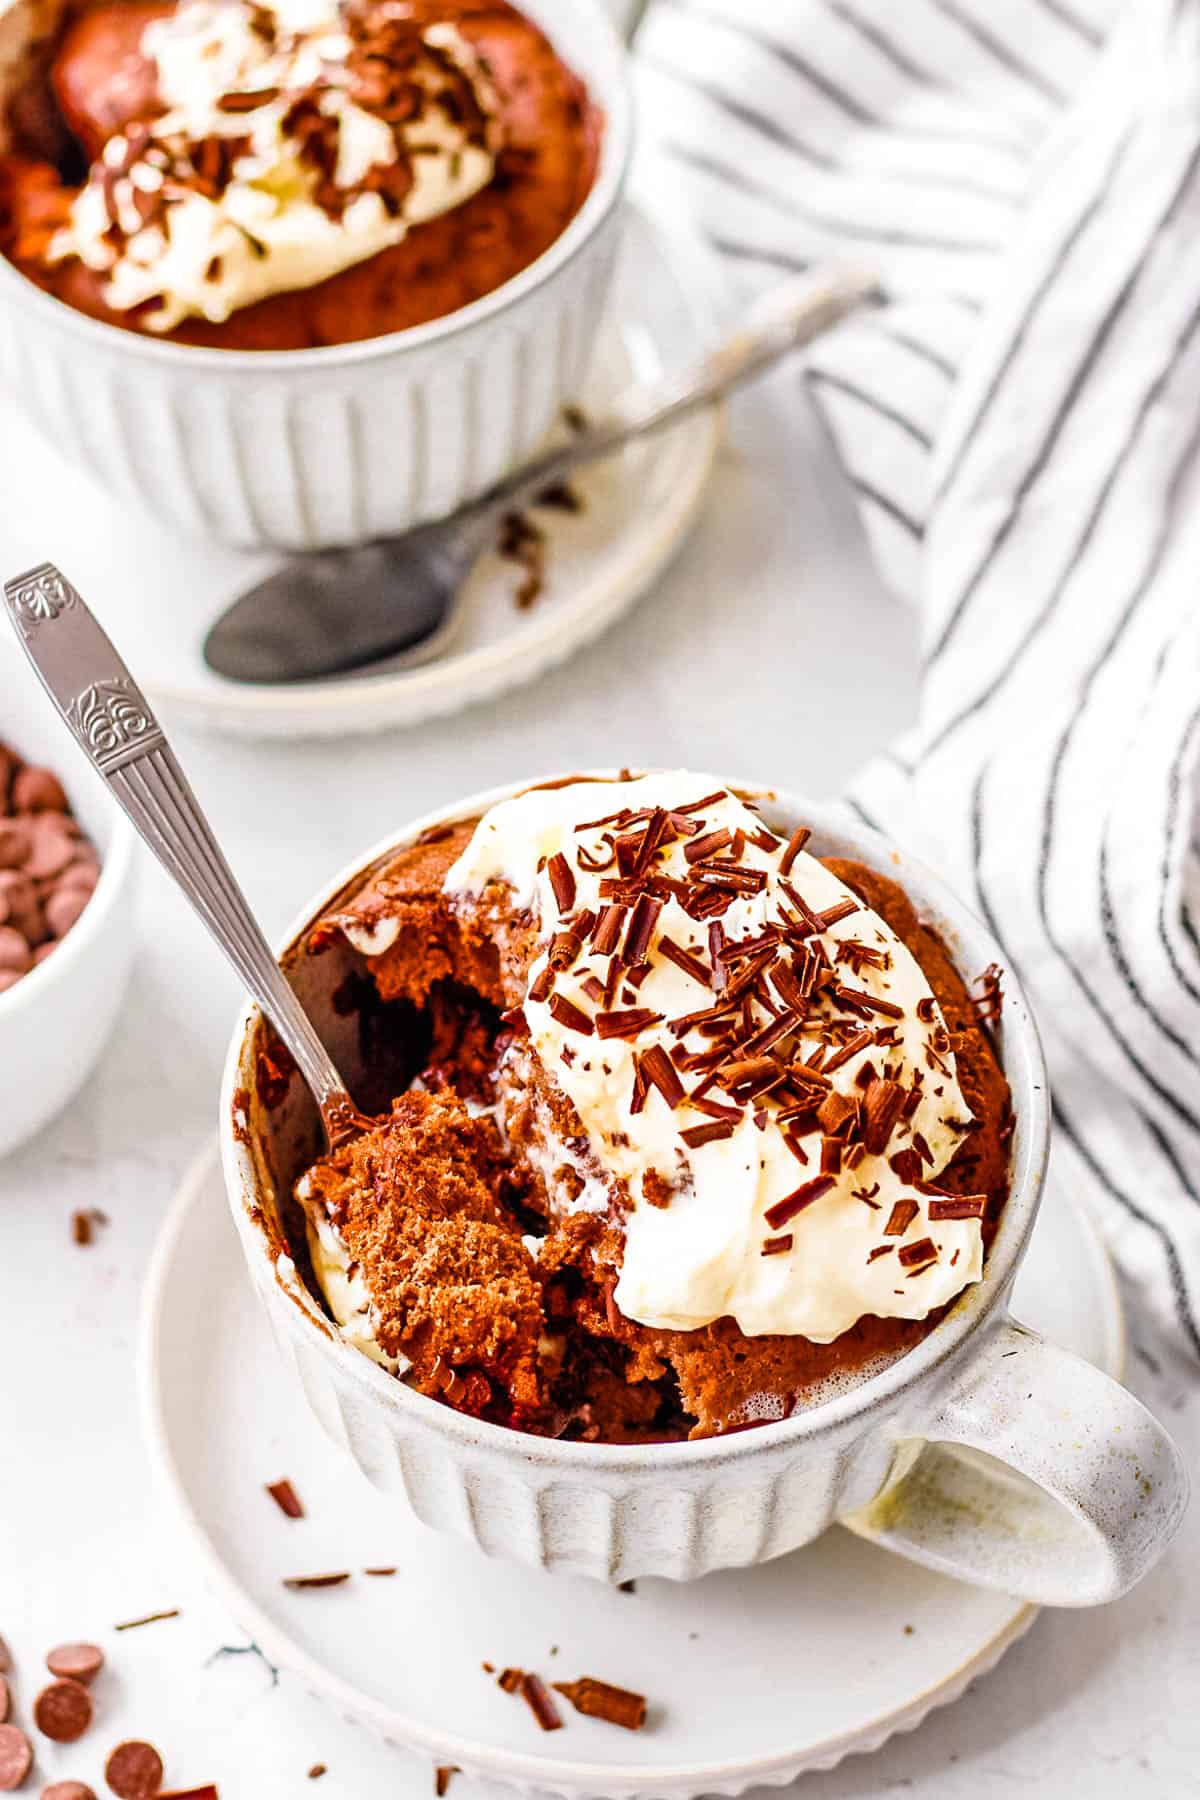 Chocolate protein powder mug cake served in a mug, topped with whipped cream and chocolate shavings.